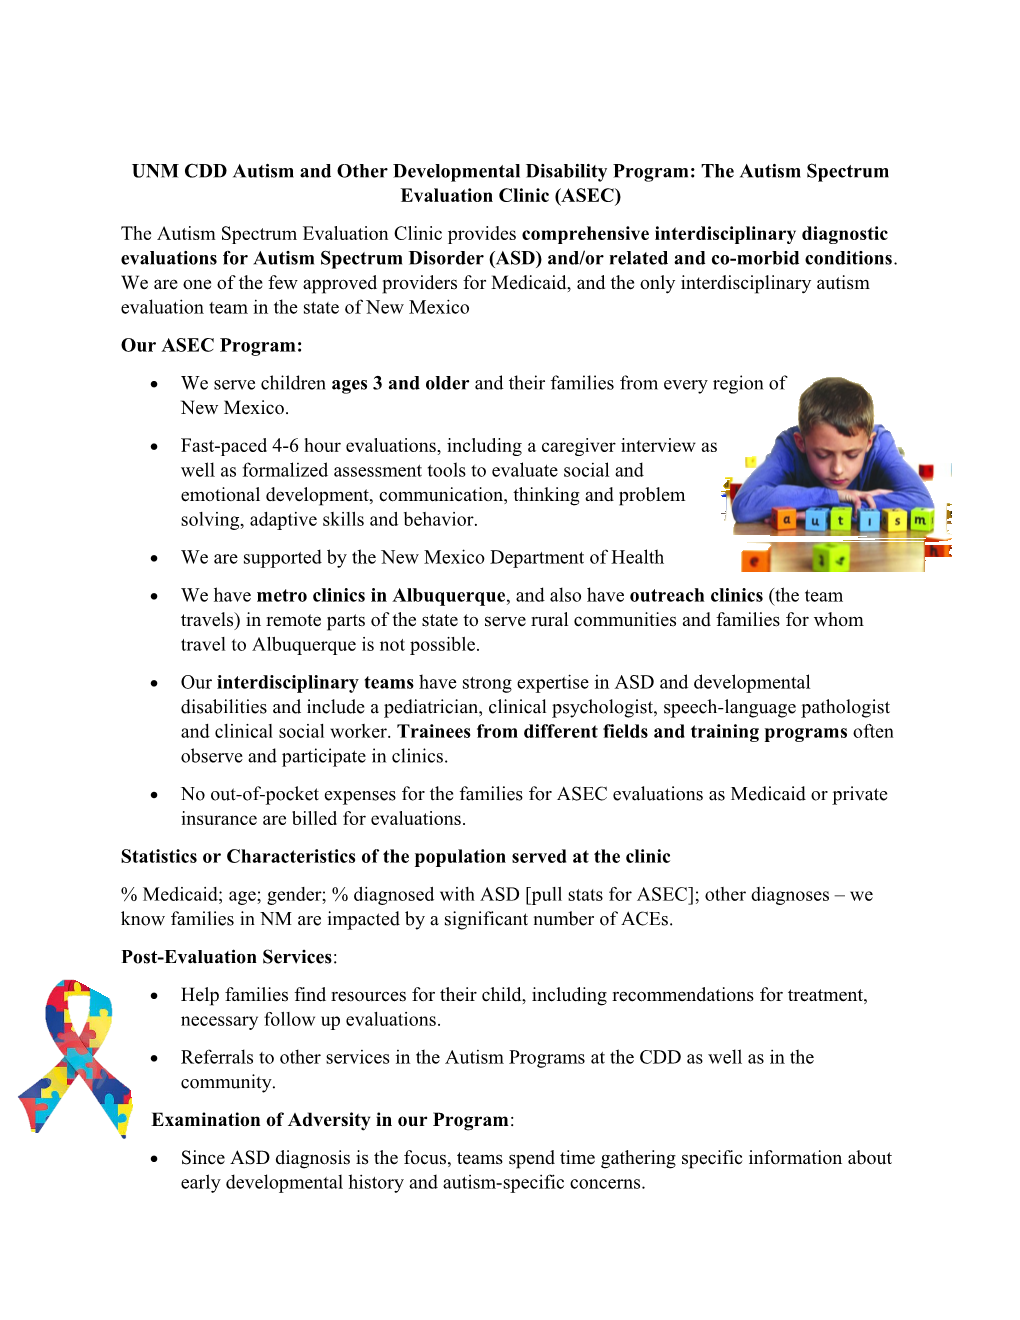 UNM CDD Autism and Other Developmental Disability Program: the Autism Spectrum Evaluation